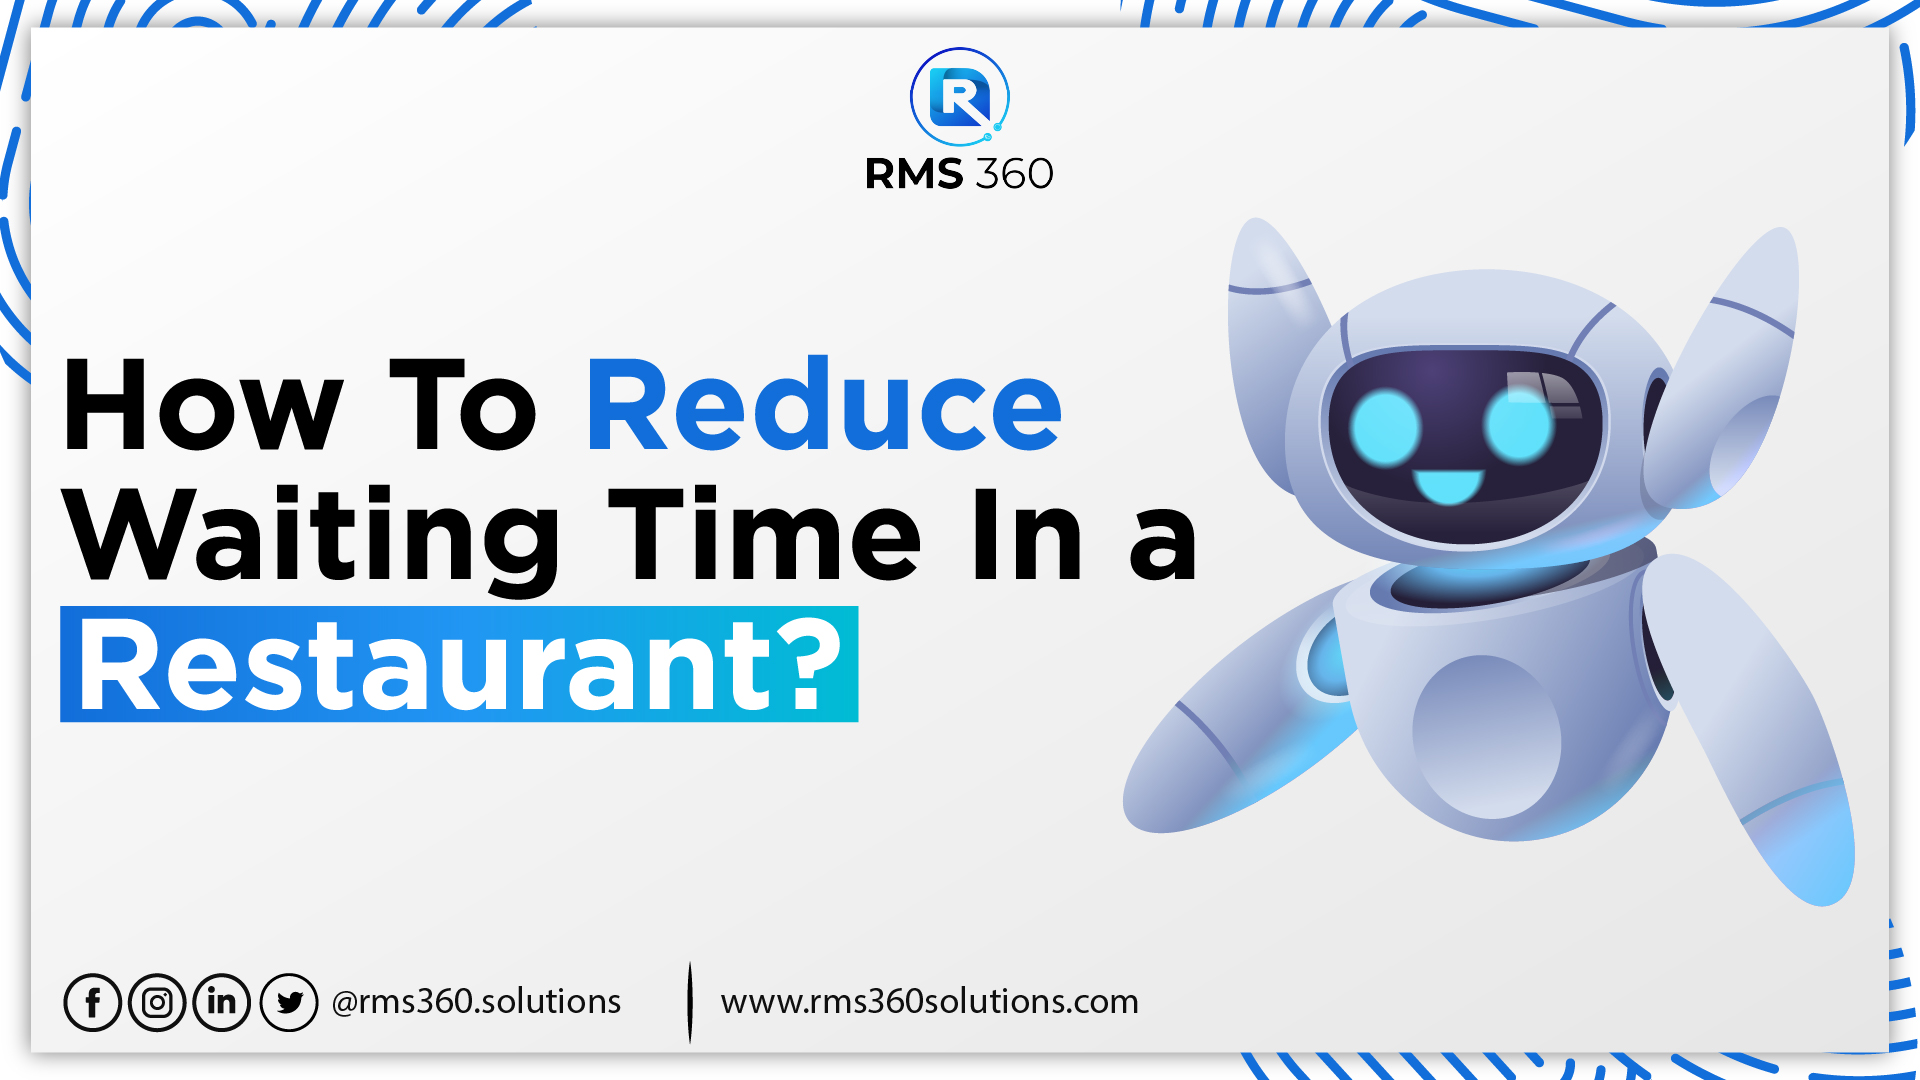 How to Reduce Waiting Time in a Restaurant?